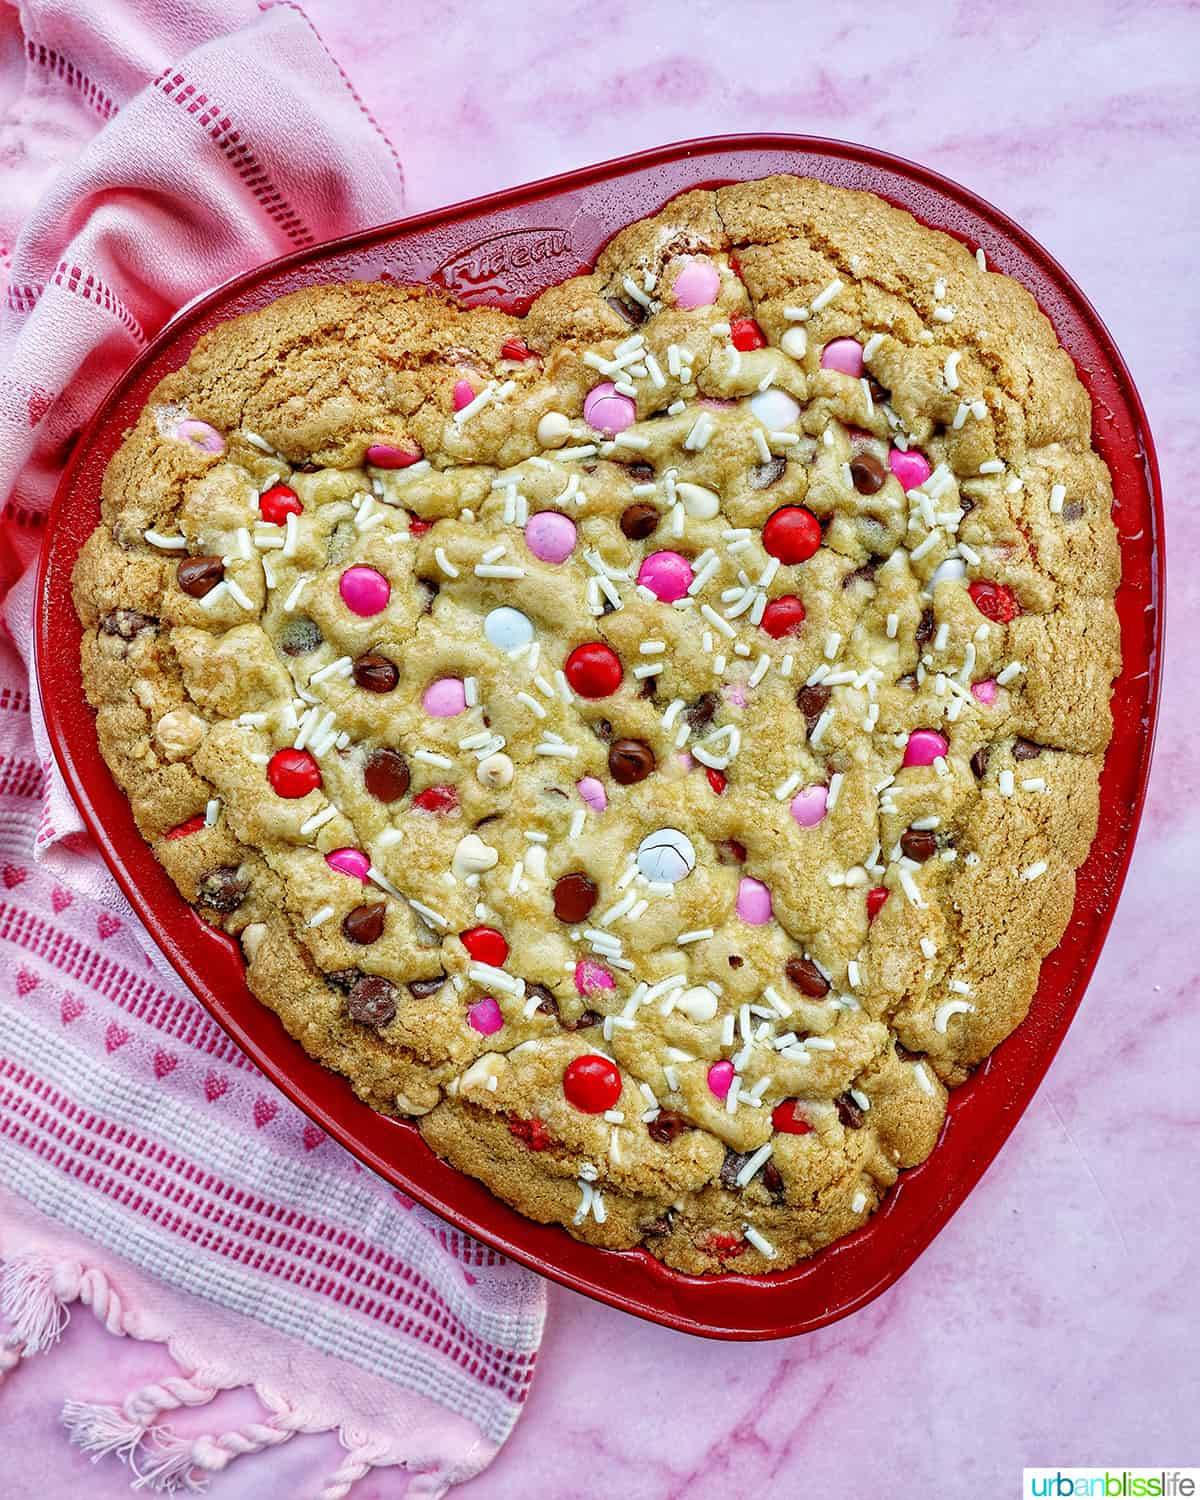 a heart-shaped cookie cake baked in a red pan on pink background.